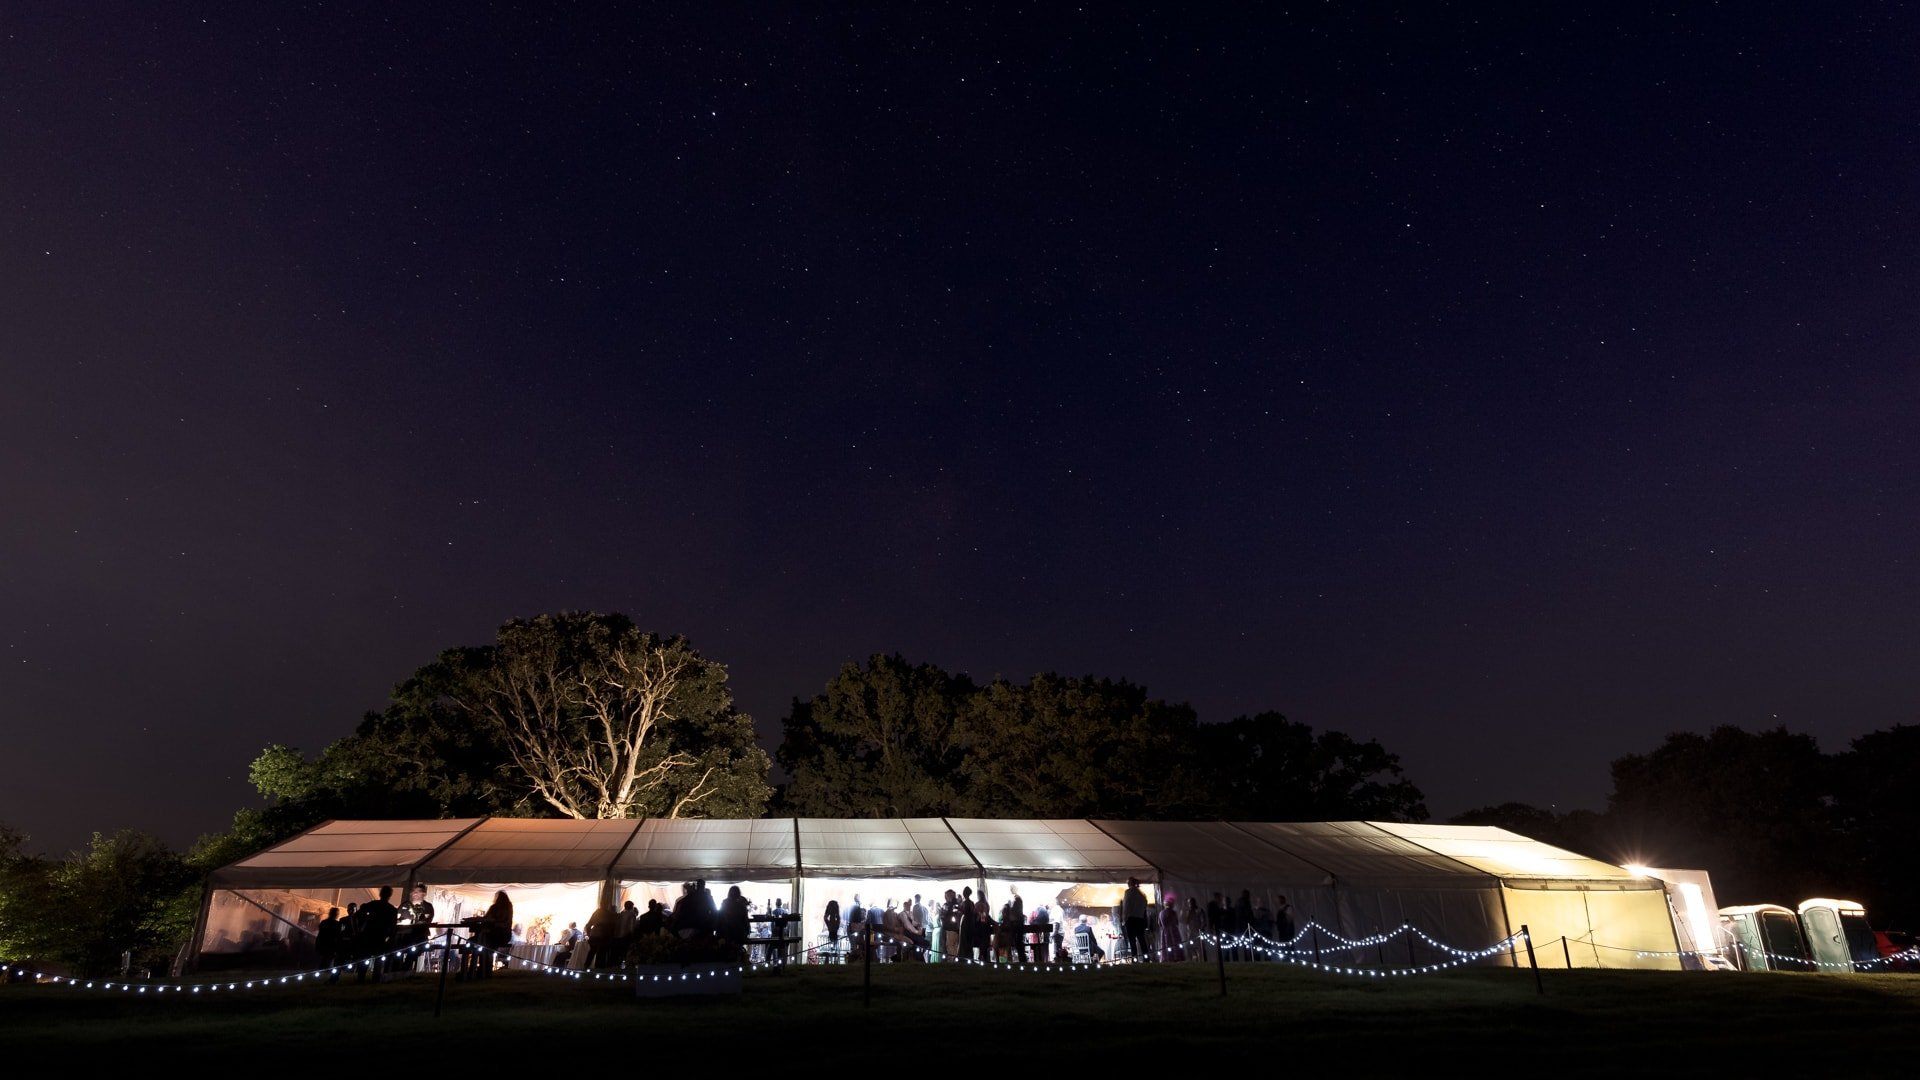 Night photograph of a wedding marquee